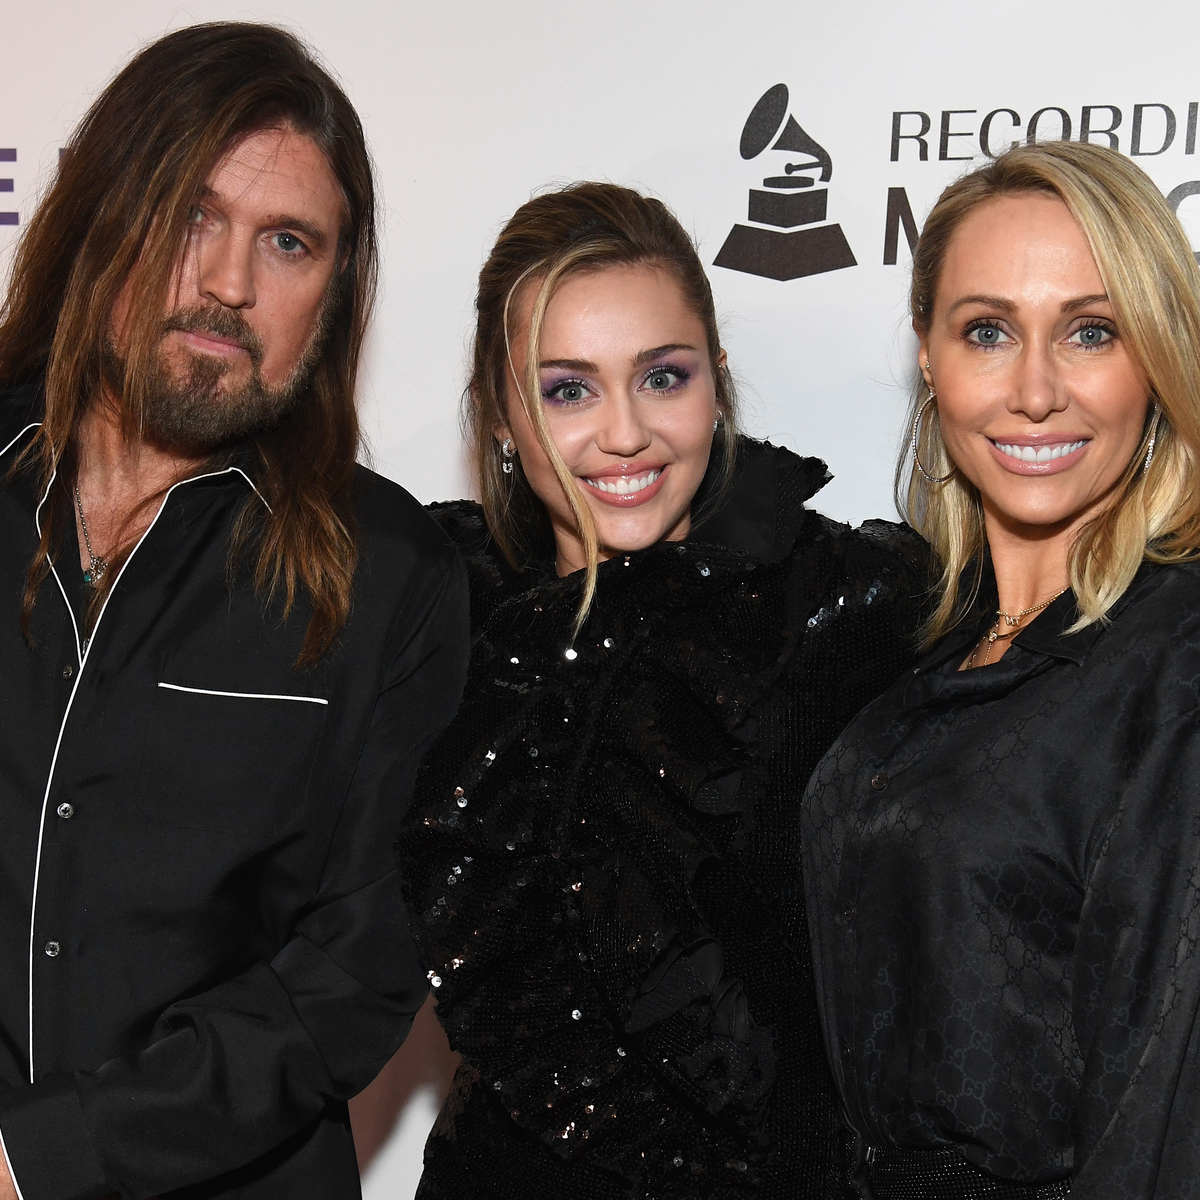 Image for article Billy Ray Cyrus Shares Cryptic Message Amid Family Rift With Tish and Miley Cyrus  E! Online  E! NEWS